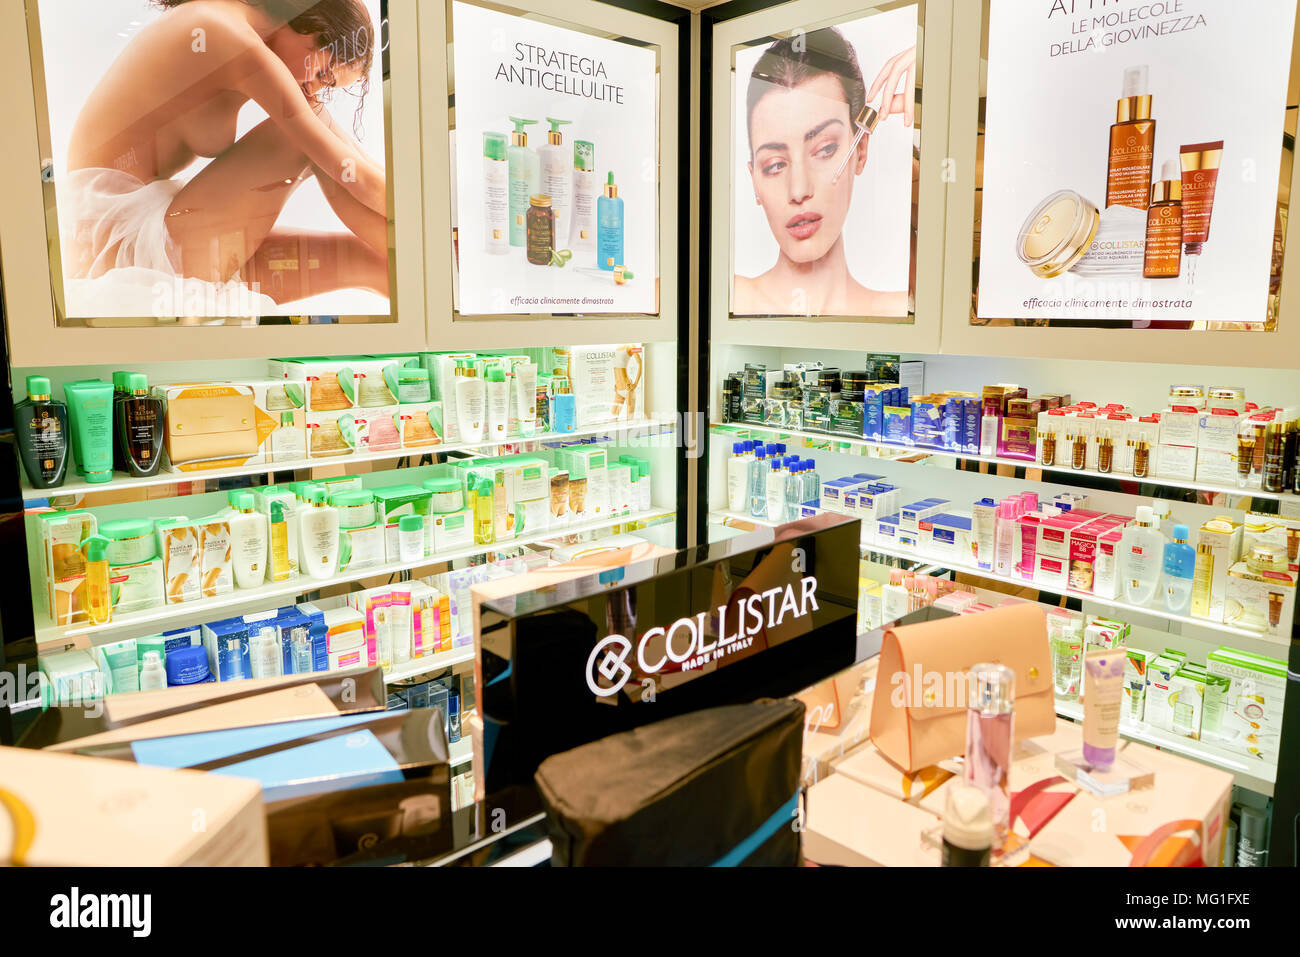 ROME, ITALY - CIRCA NOVEMBER, 2017: Collistar beauty products sit